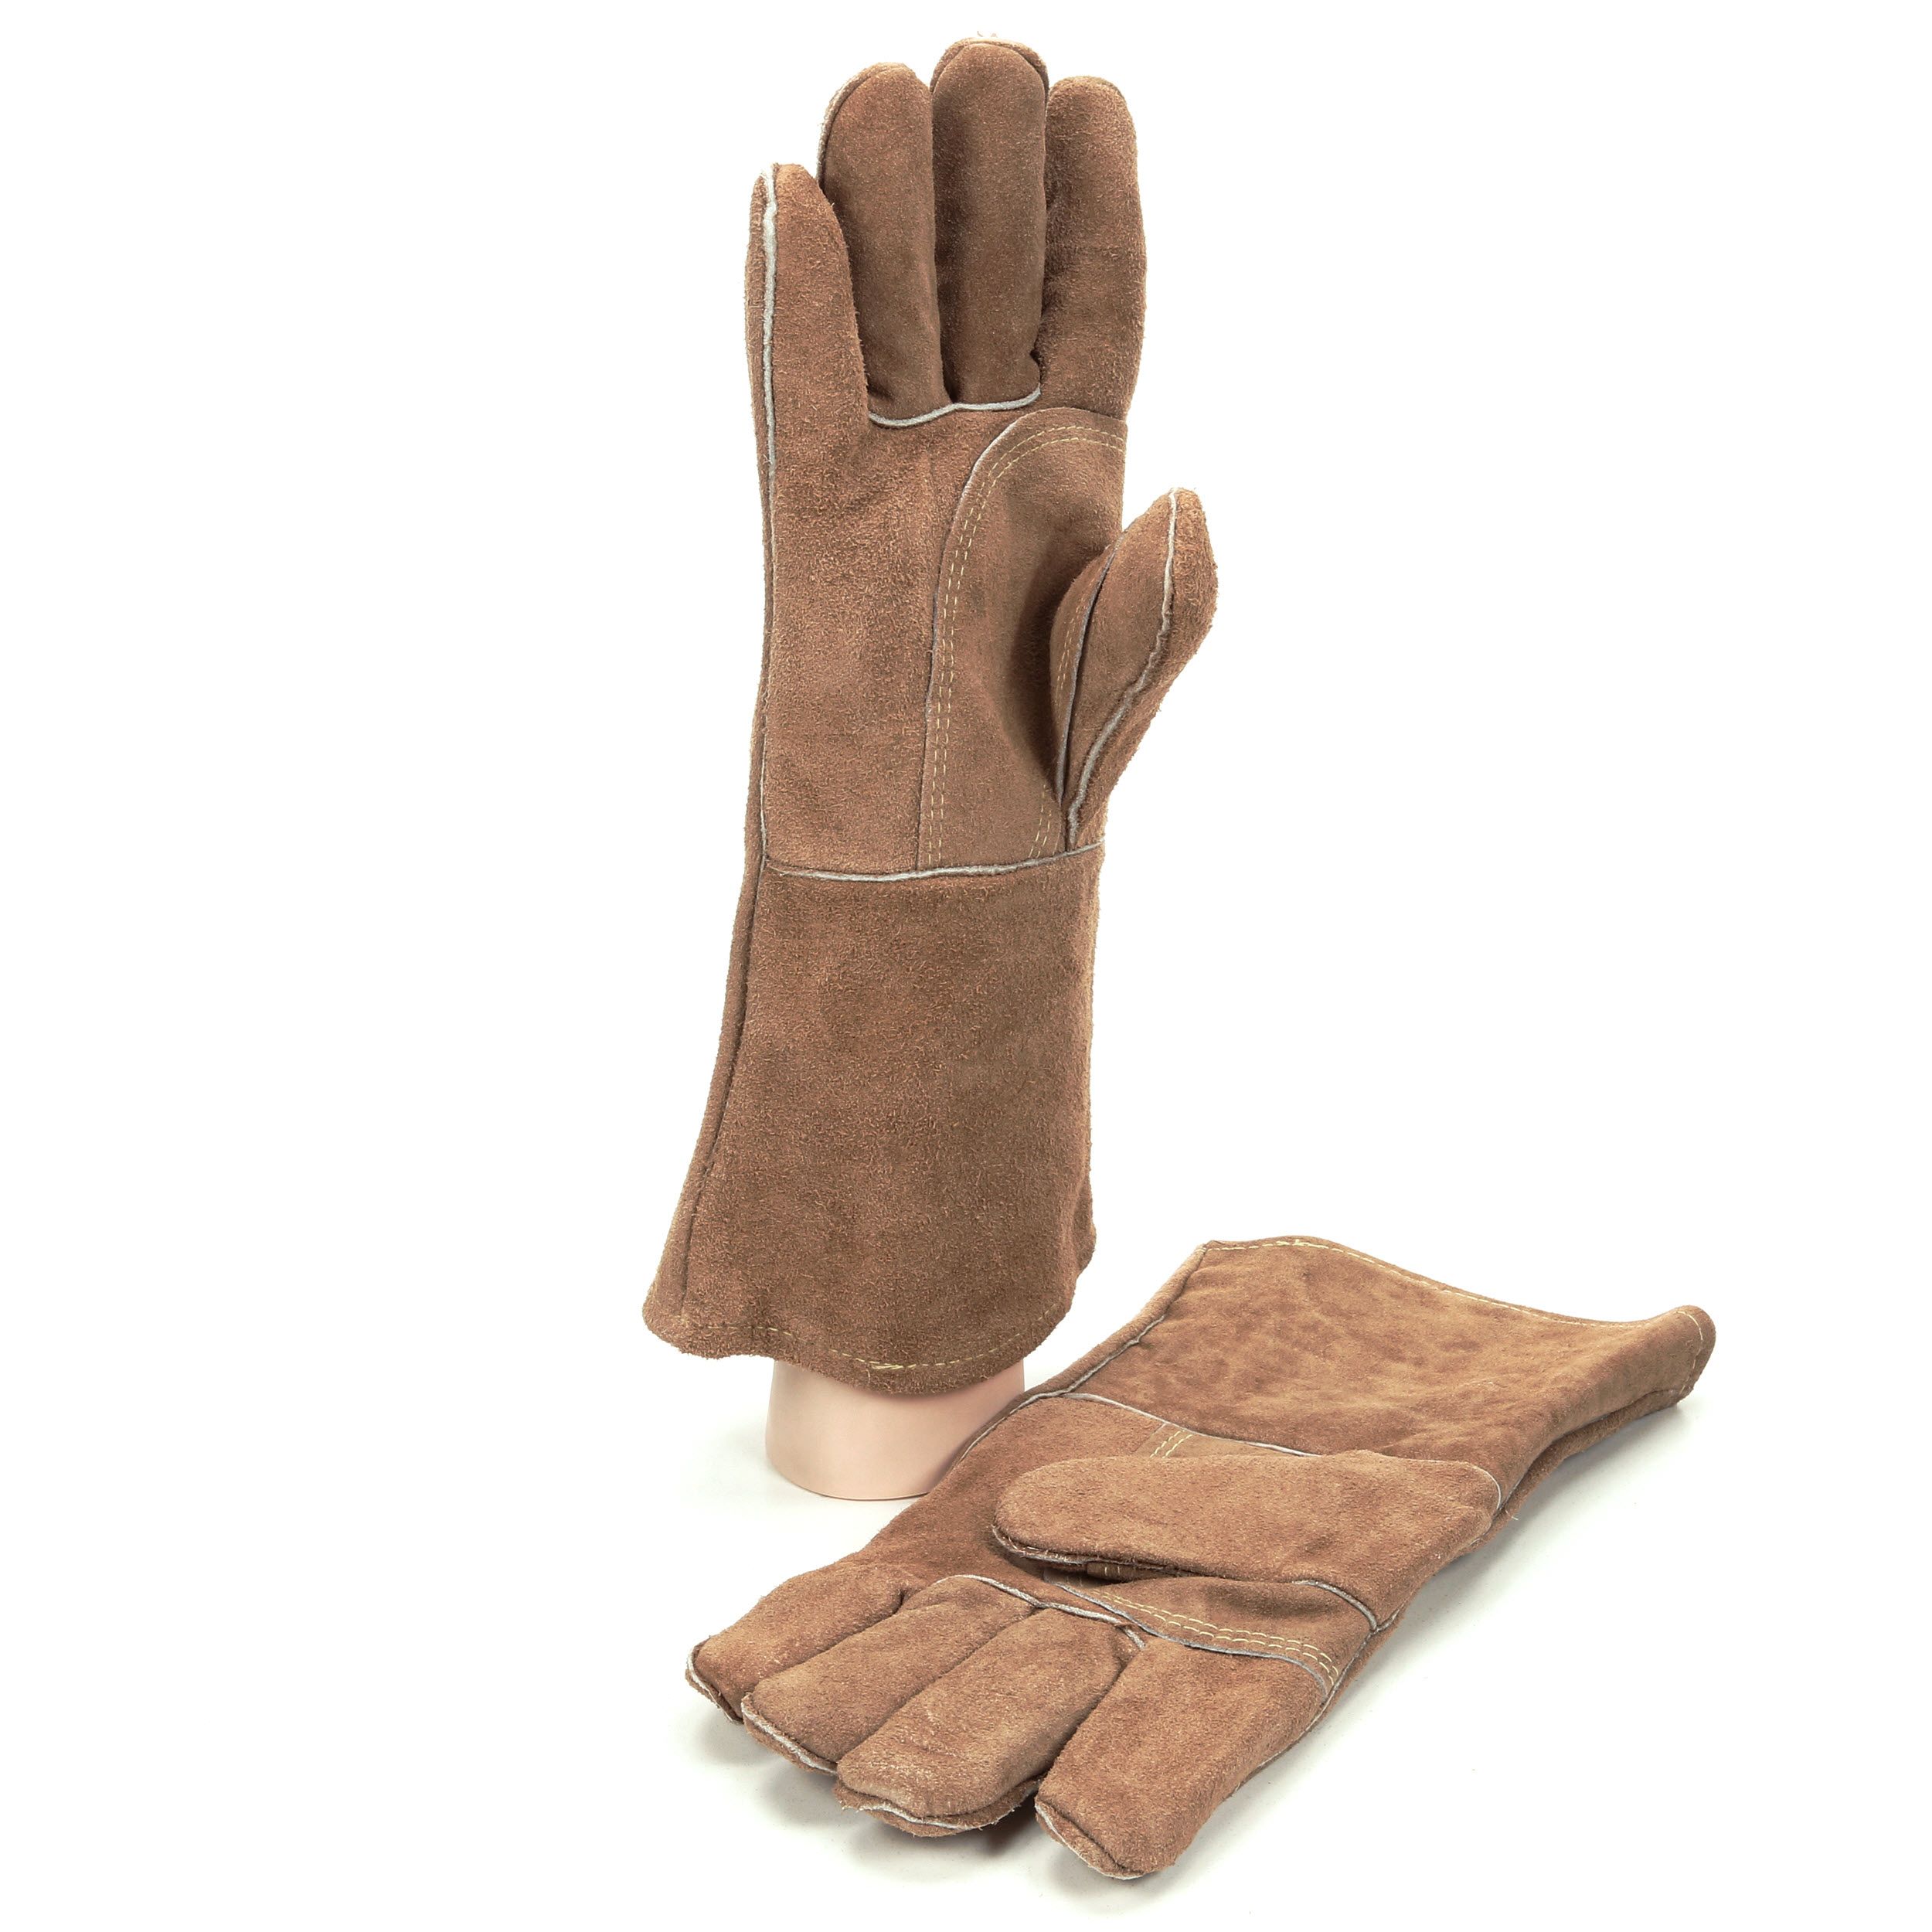 Insulated Winter Cowhide Leather Large Work Gloves Split Cowhide Positherm Lined 